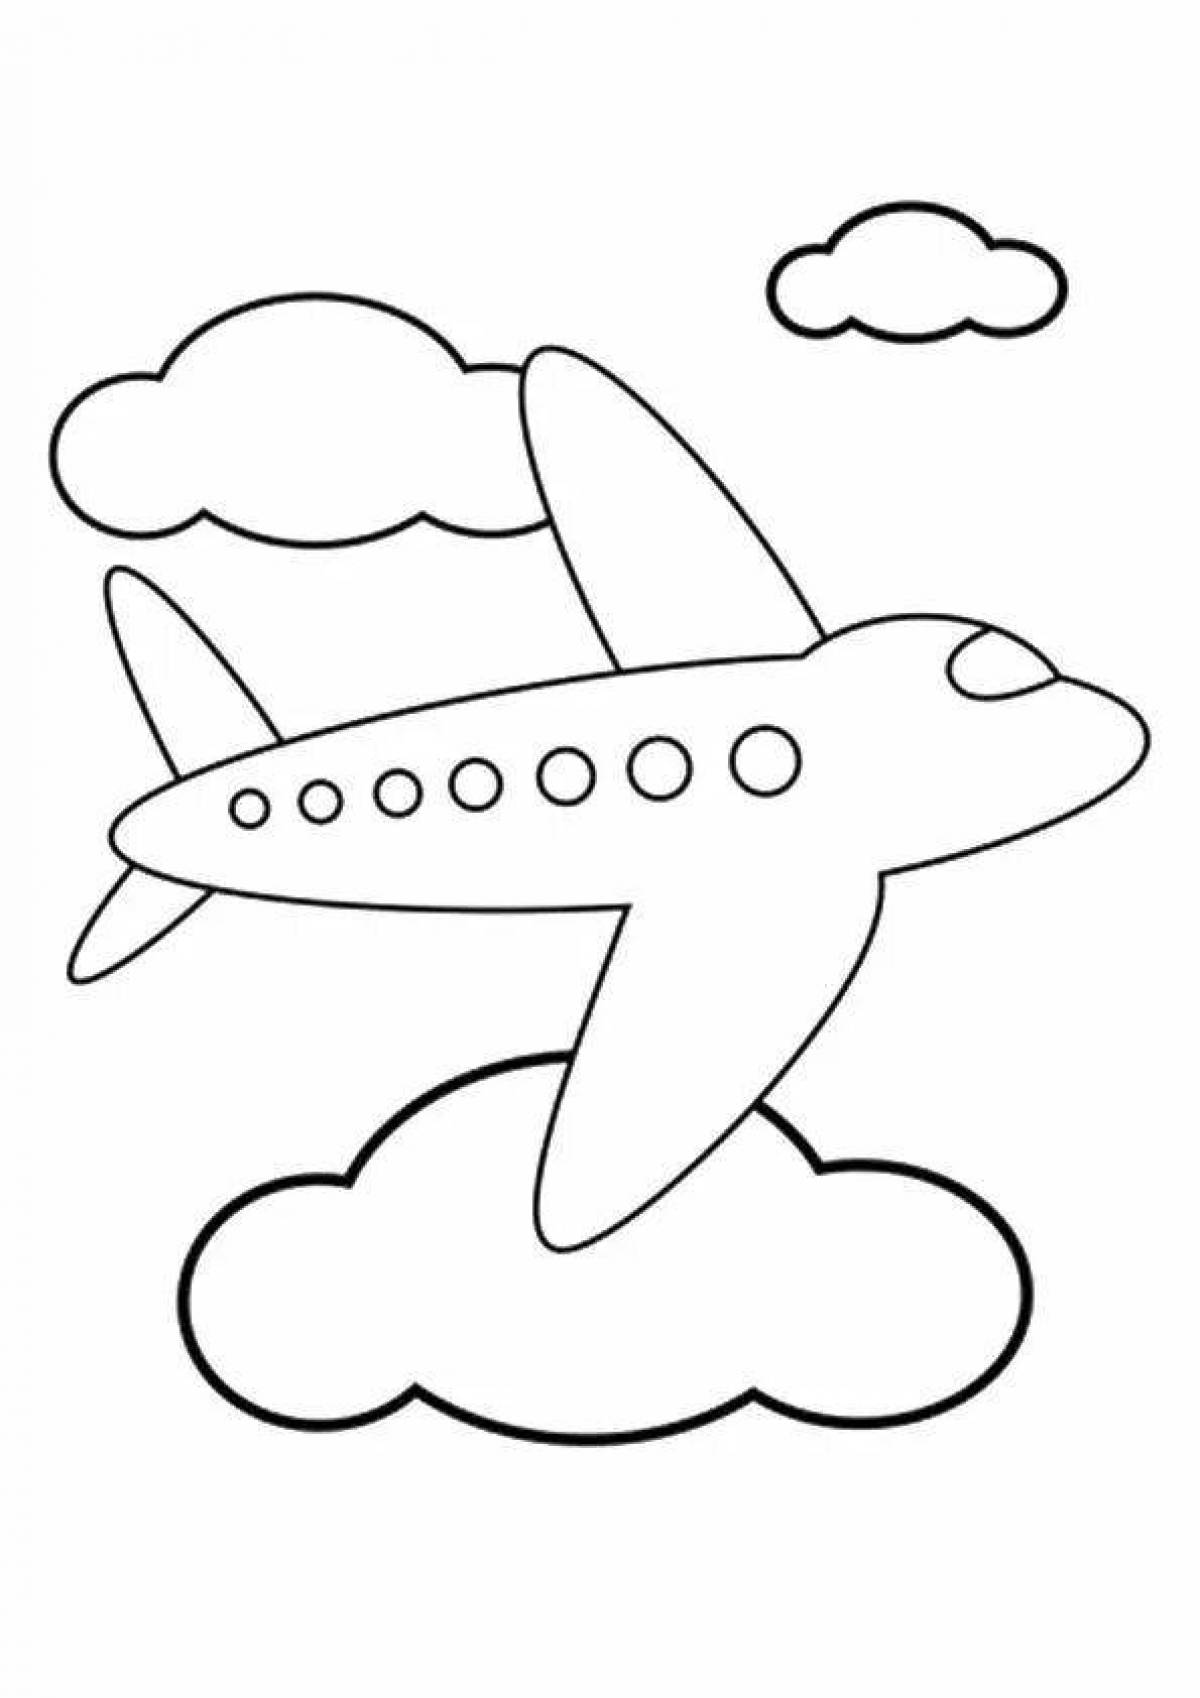 Attractive airplane pattern coloring page